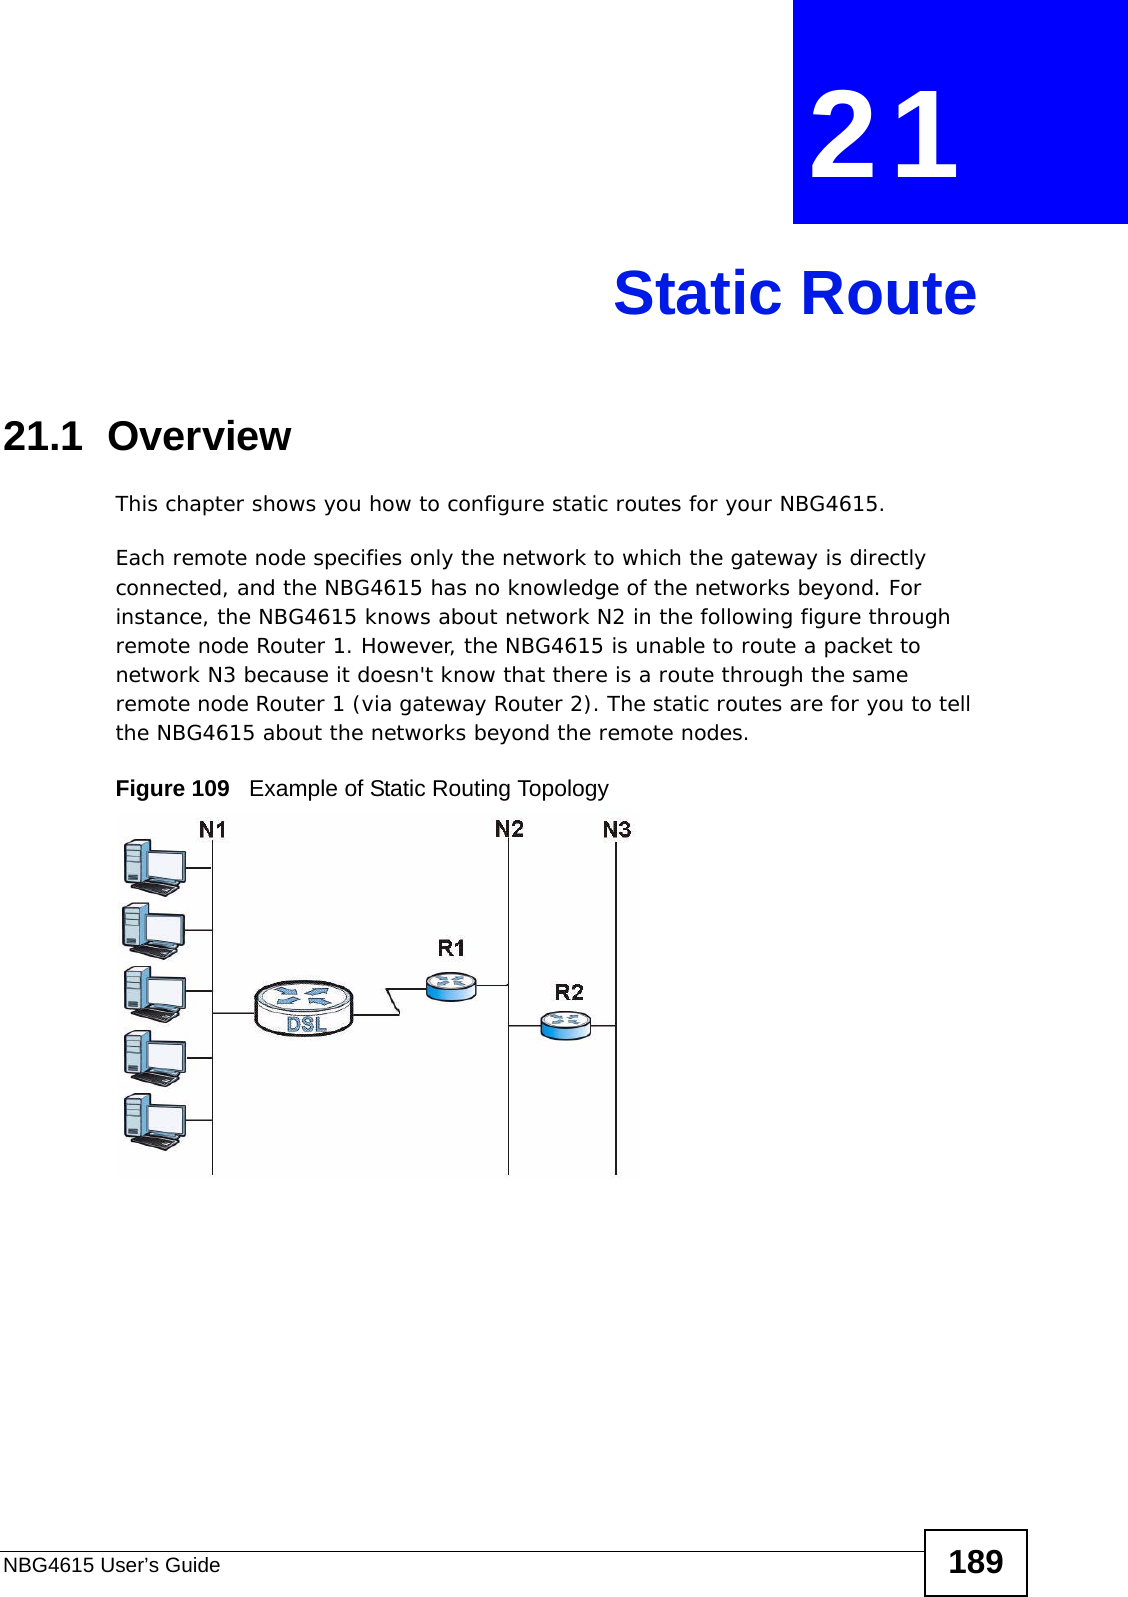 NBG4615 User’s Guide 189CHAPTER  21 Static Route21.1  Overview   This chapter shows you how to configure static routes for your NBG4615.Each remote node specifies only the network to which the gateway is directly connected, and the NBG4615 has no knowledge of the networks beyond. For instance, the NBG4615 knows about network N2 in the following figure through remote node Router 1. However, the NBG4615 is unable to route a packet to network N3 because it doesn&apos;t know that there is a route through the same remote node Router 1 (via gateway Router 2). The static routes are for you to tell the NBG4615 about the networks beyond the remote nodes.Figure 109   Example of Static Routing Topology